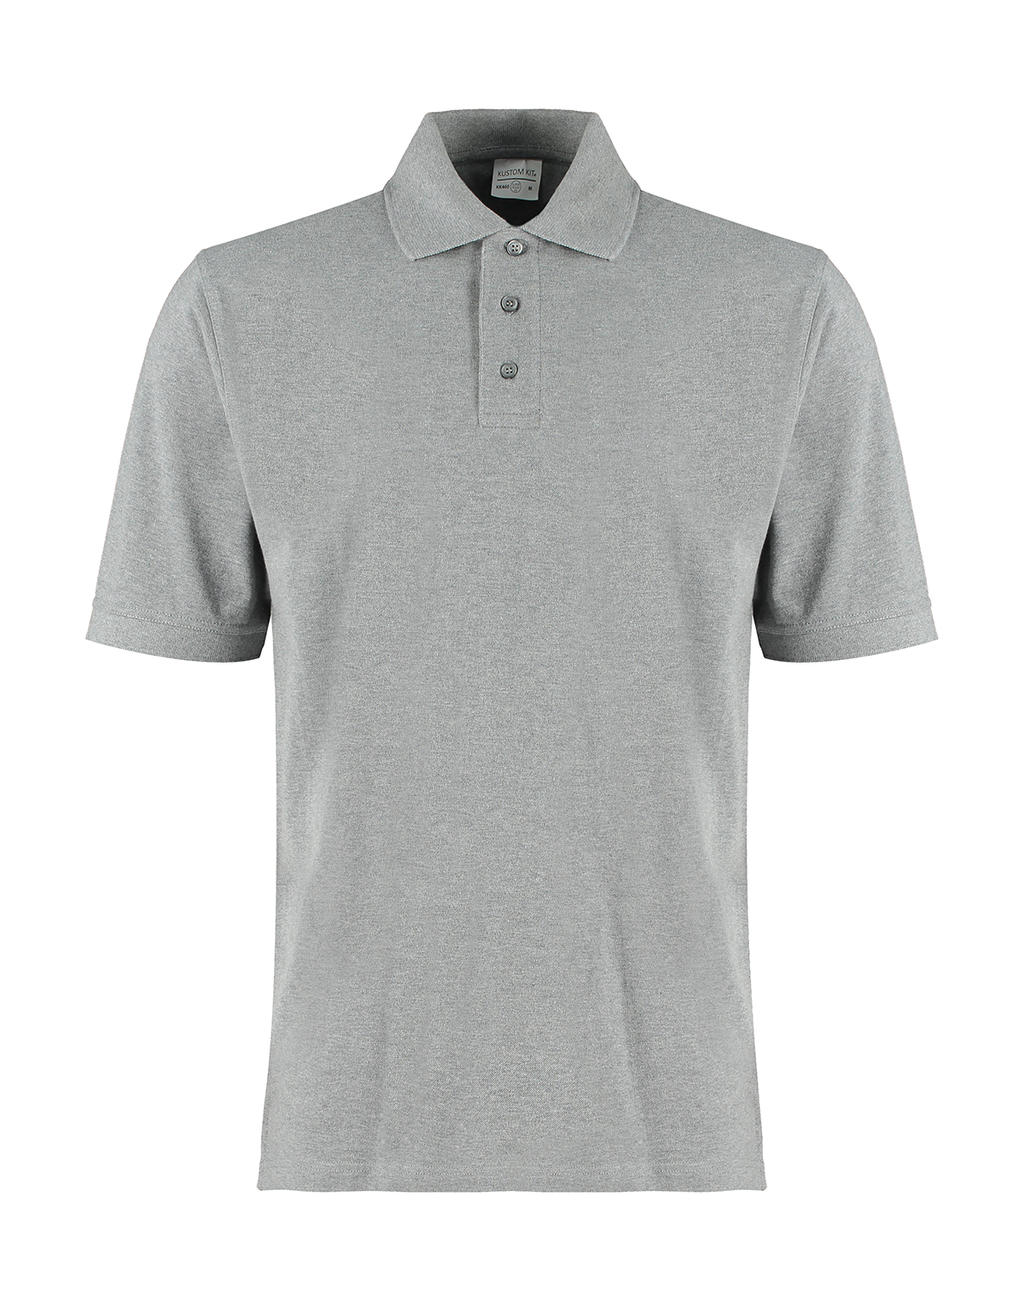  Classic Fit Cotton Klassic Superwash? 60? Polo in Farbe Heather Grey Marl